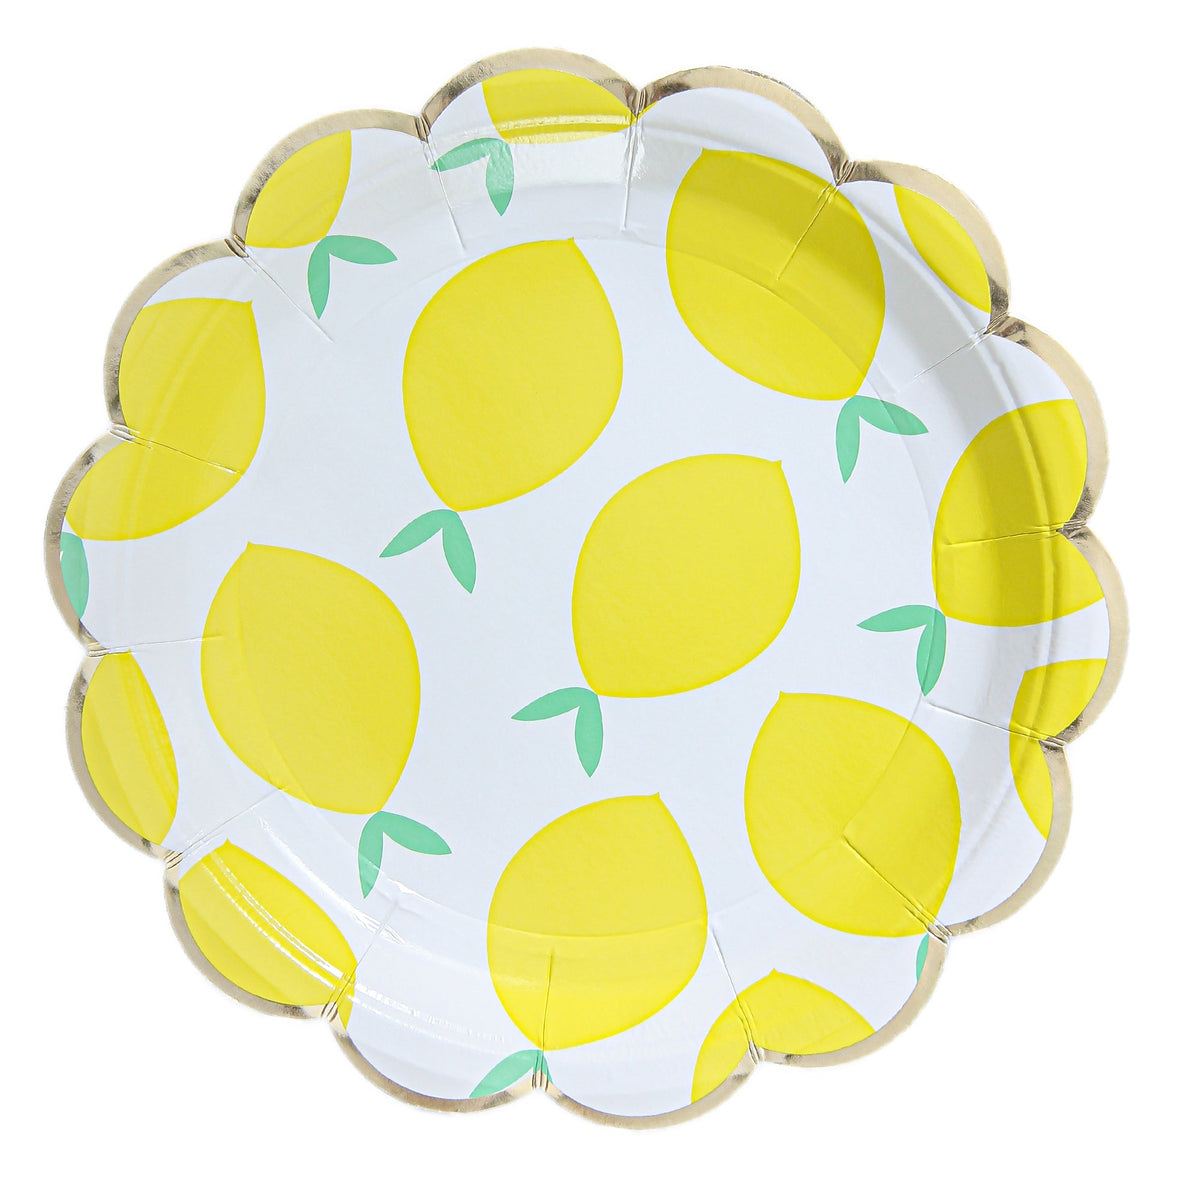 YIWU SANDY PAPER PRODUCTS CO., LTD Everyday Entertaining Lemoncello Large Lunch Paper Plates, 9 Inches, 8 Count